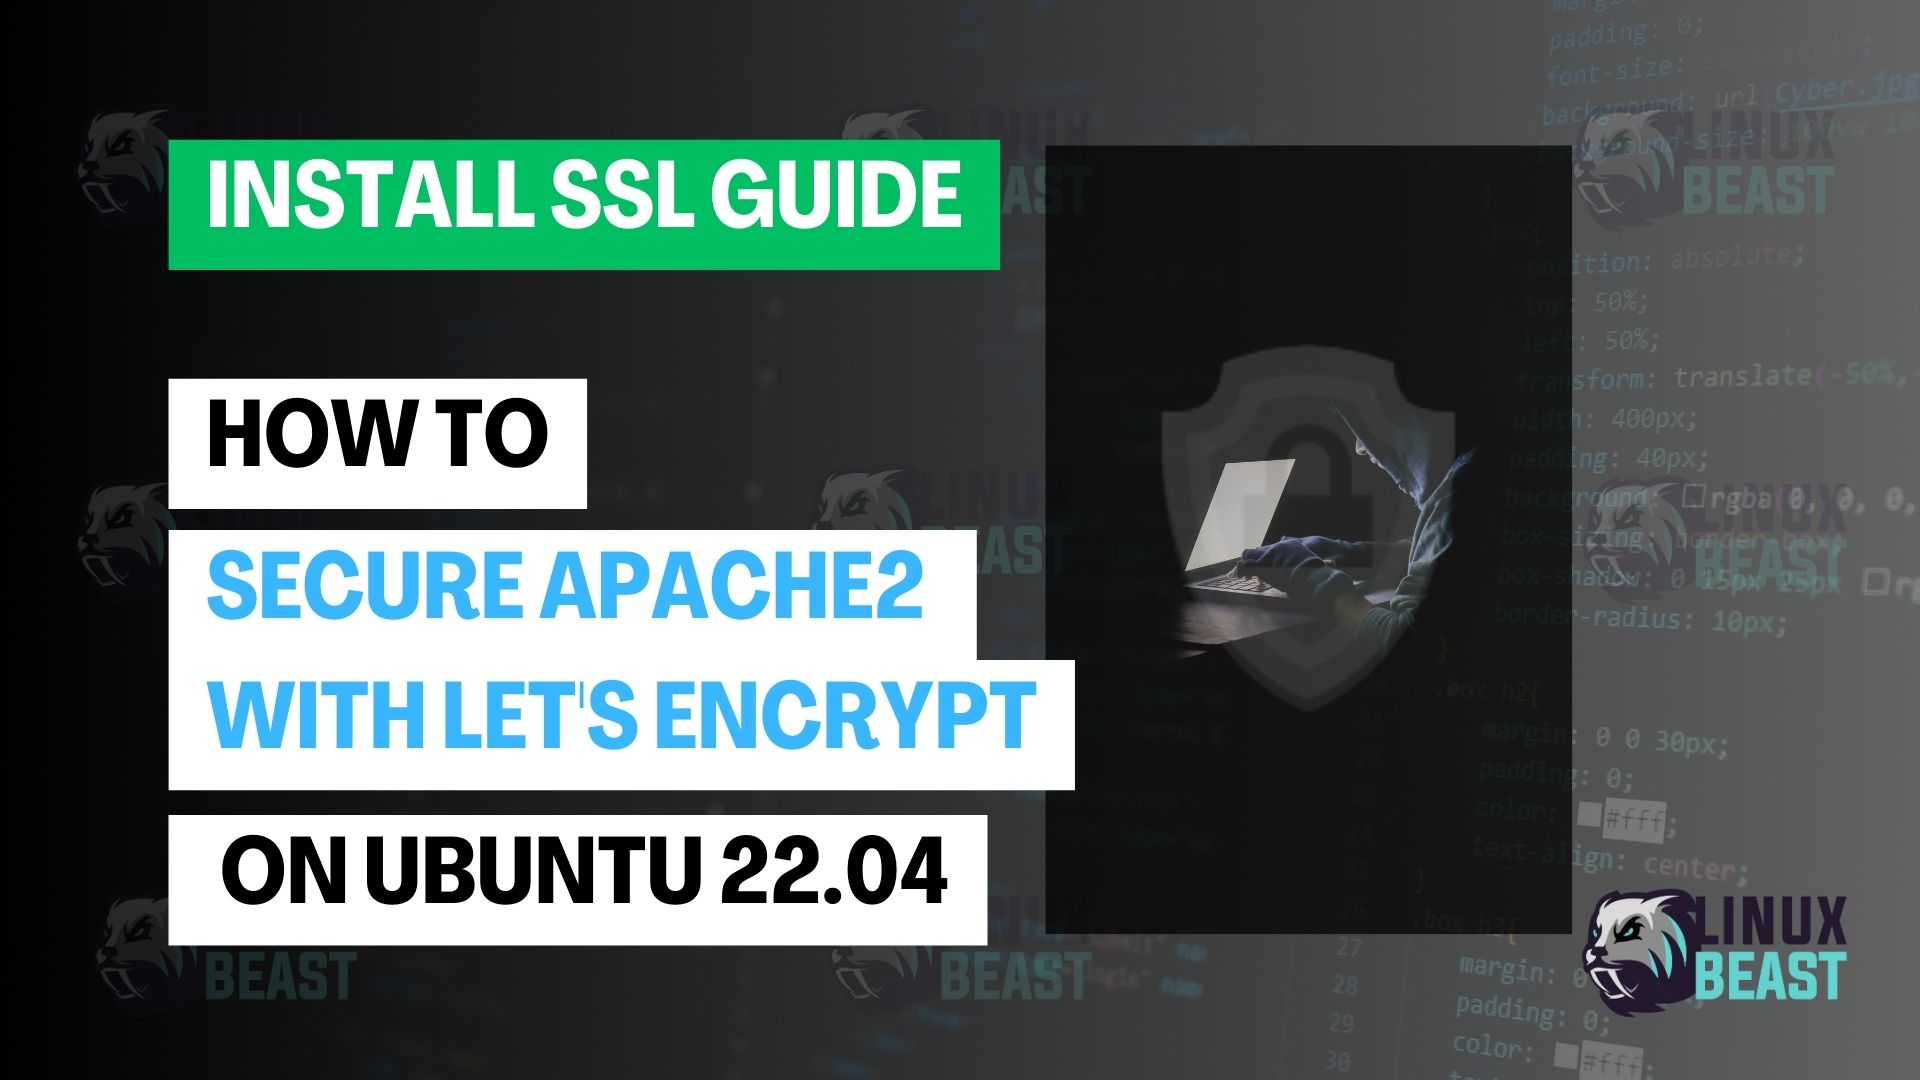 How to Secure Apache2 with Let’s Encrypt on Ubuntu 22.04